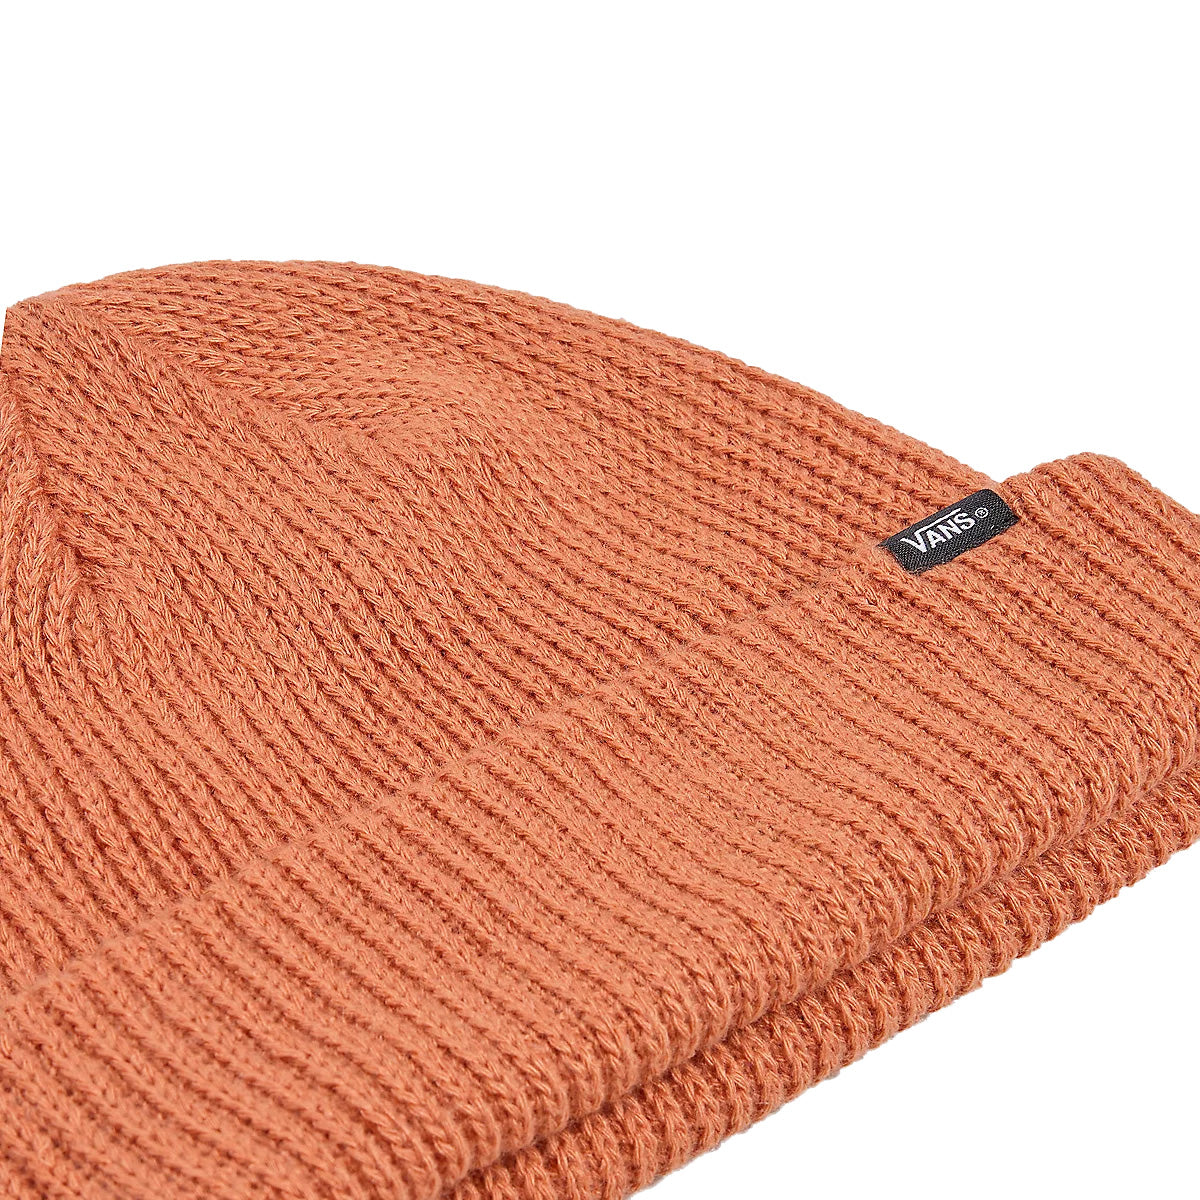 Salmon pink vans cuffed and ribbed beanie with vans logo tag. Free uk shipping over £50